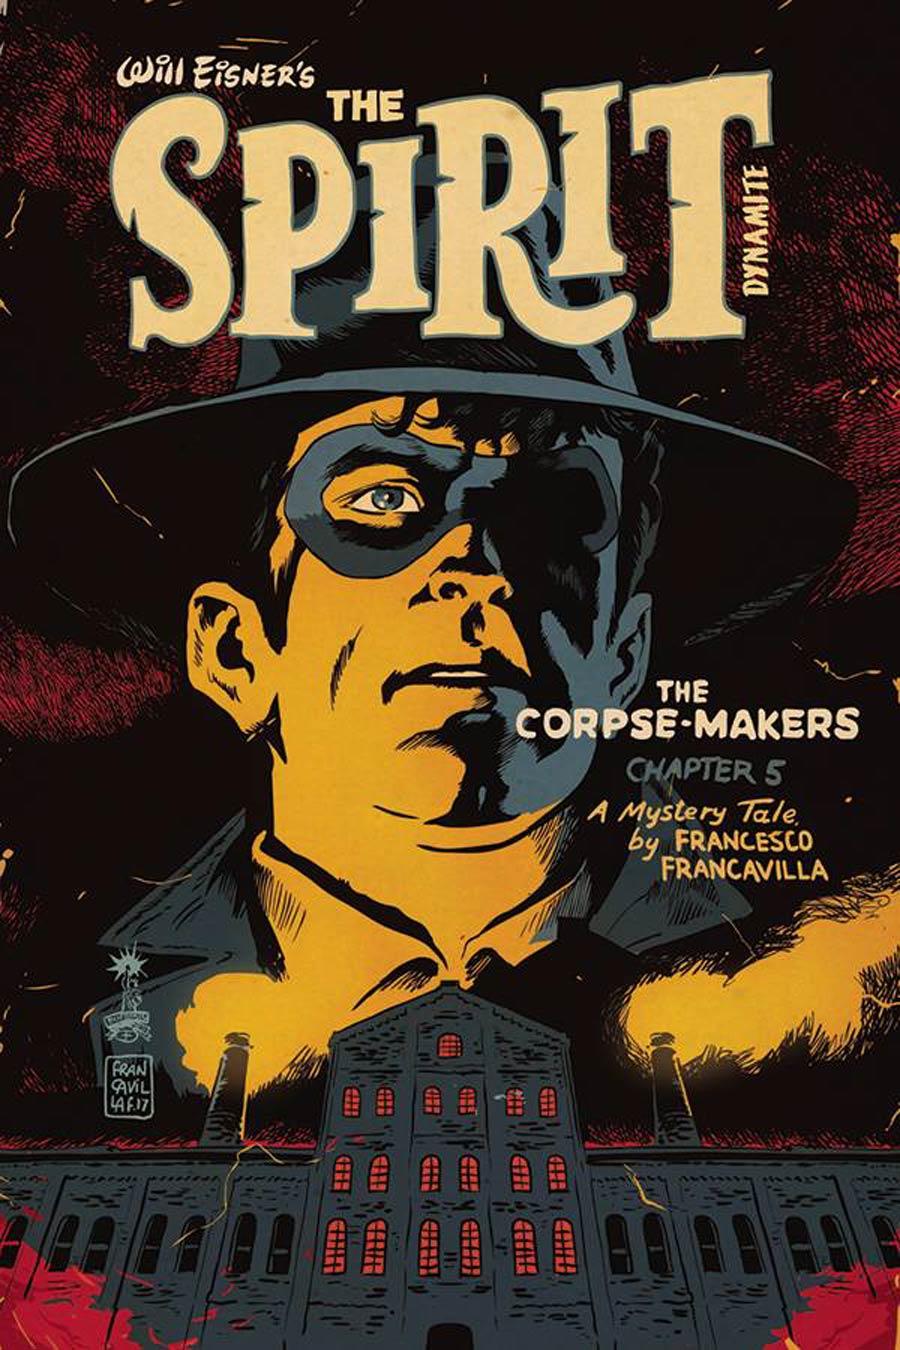 Will Eisners Spirit Corpse-Makers Vol. 1 #5